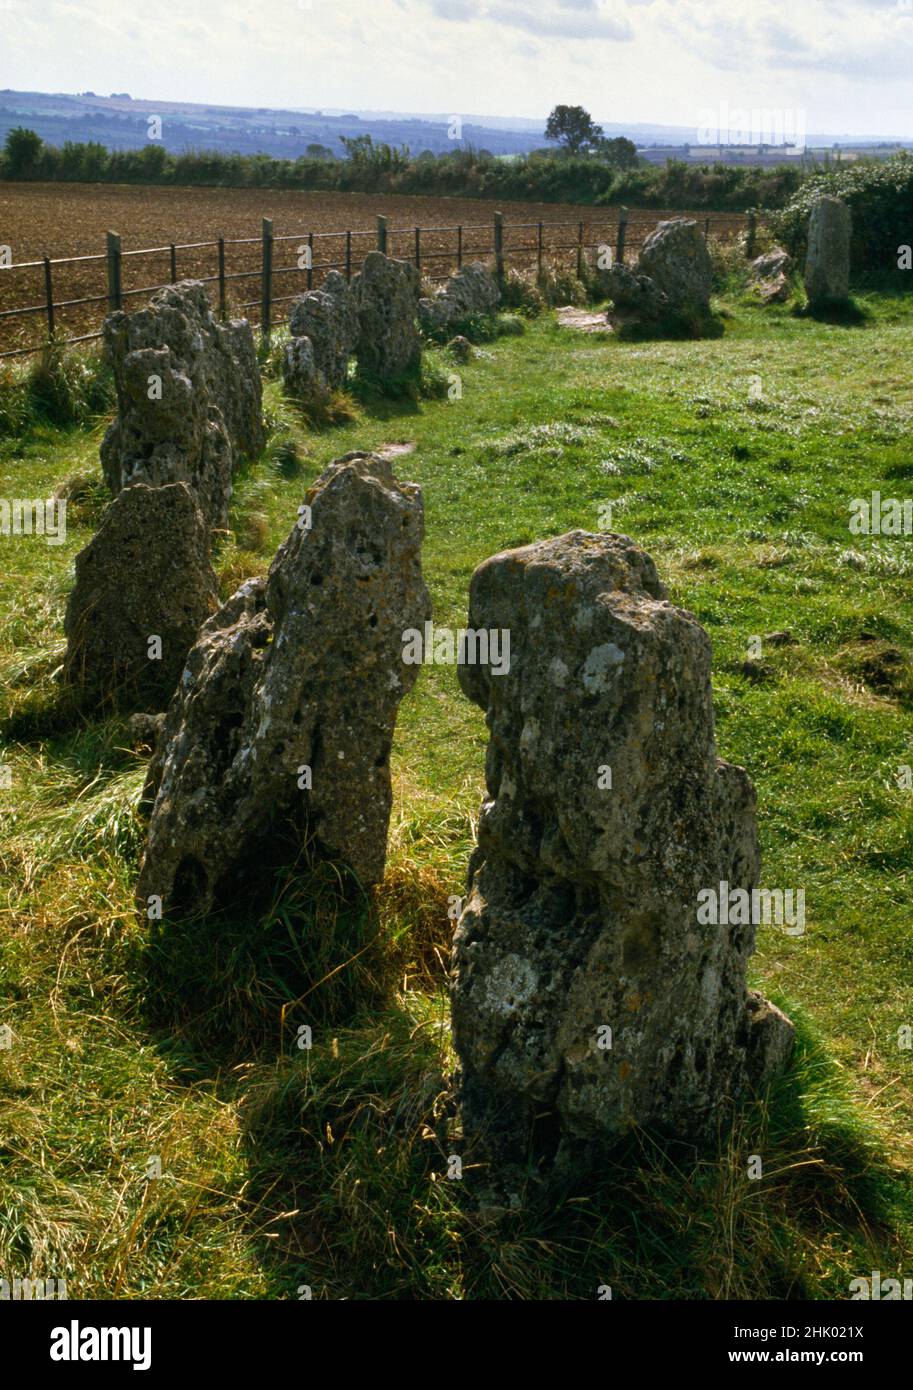 View S along E arc of the Rollright Stones late Neolithic stone circle (the King's Men), Oxfordshire, England, UK. Originally 100+ limestone pillars. Stock Photo